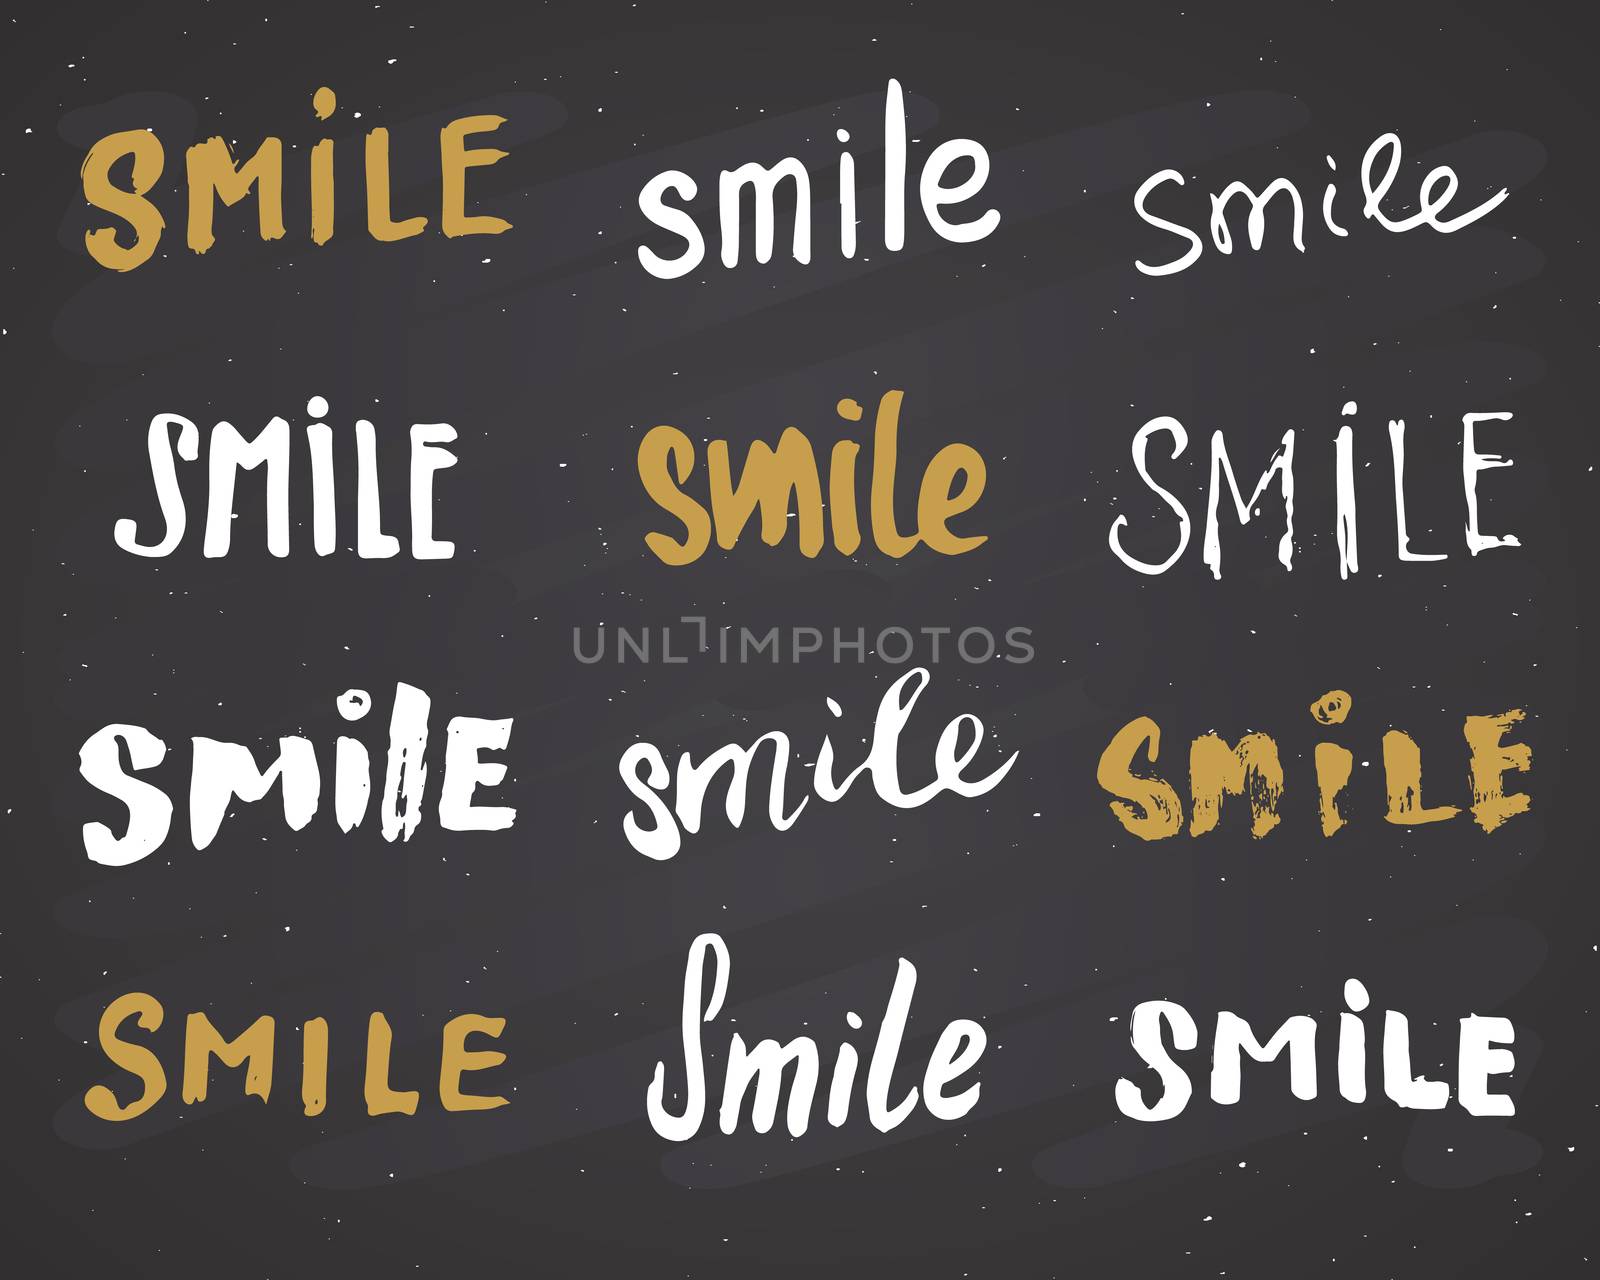 Smile letterings handwritten signs set, Hand drawn grunge calligraphic text. Vector illustration on chalkboard background.